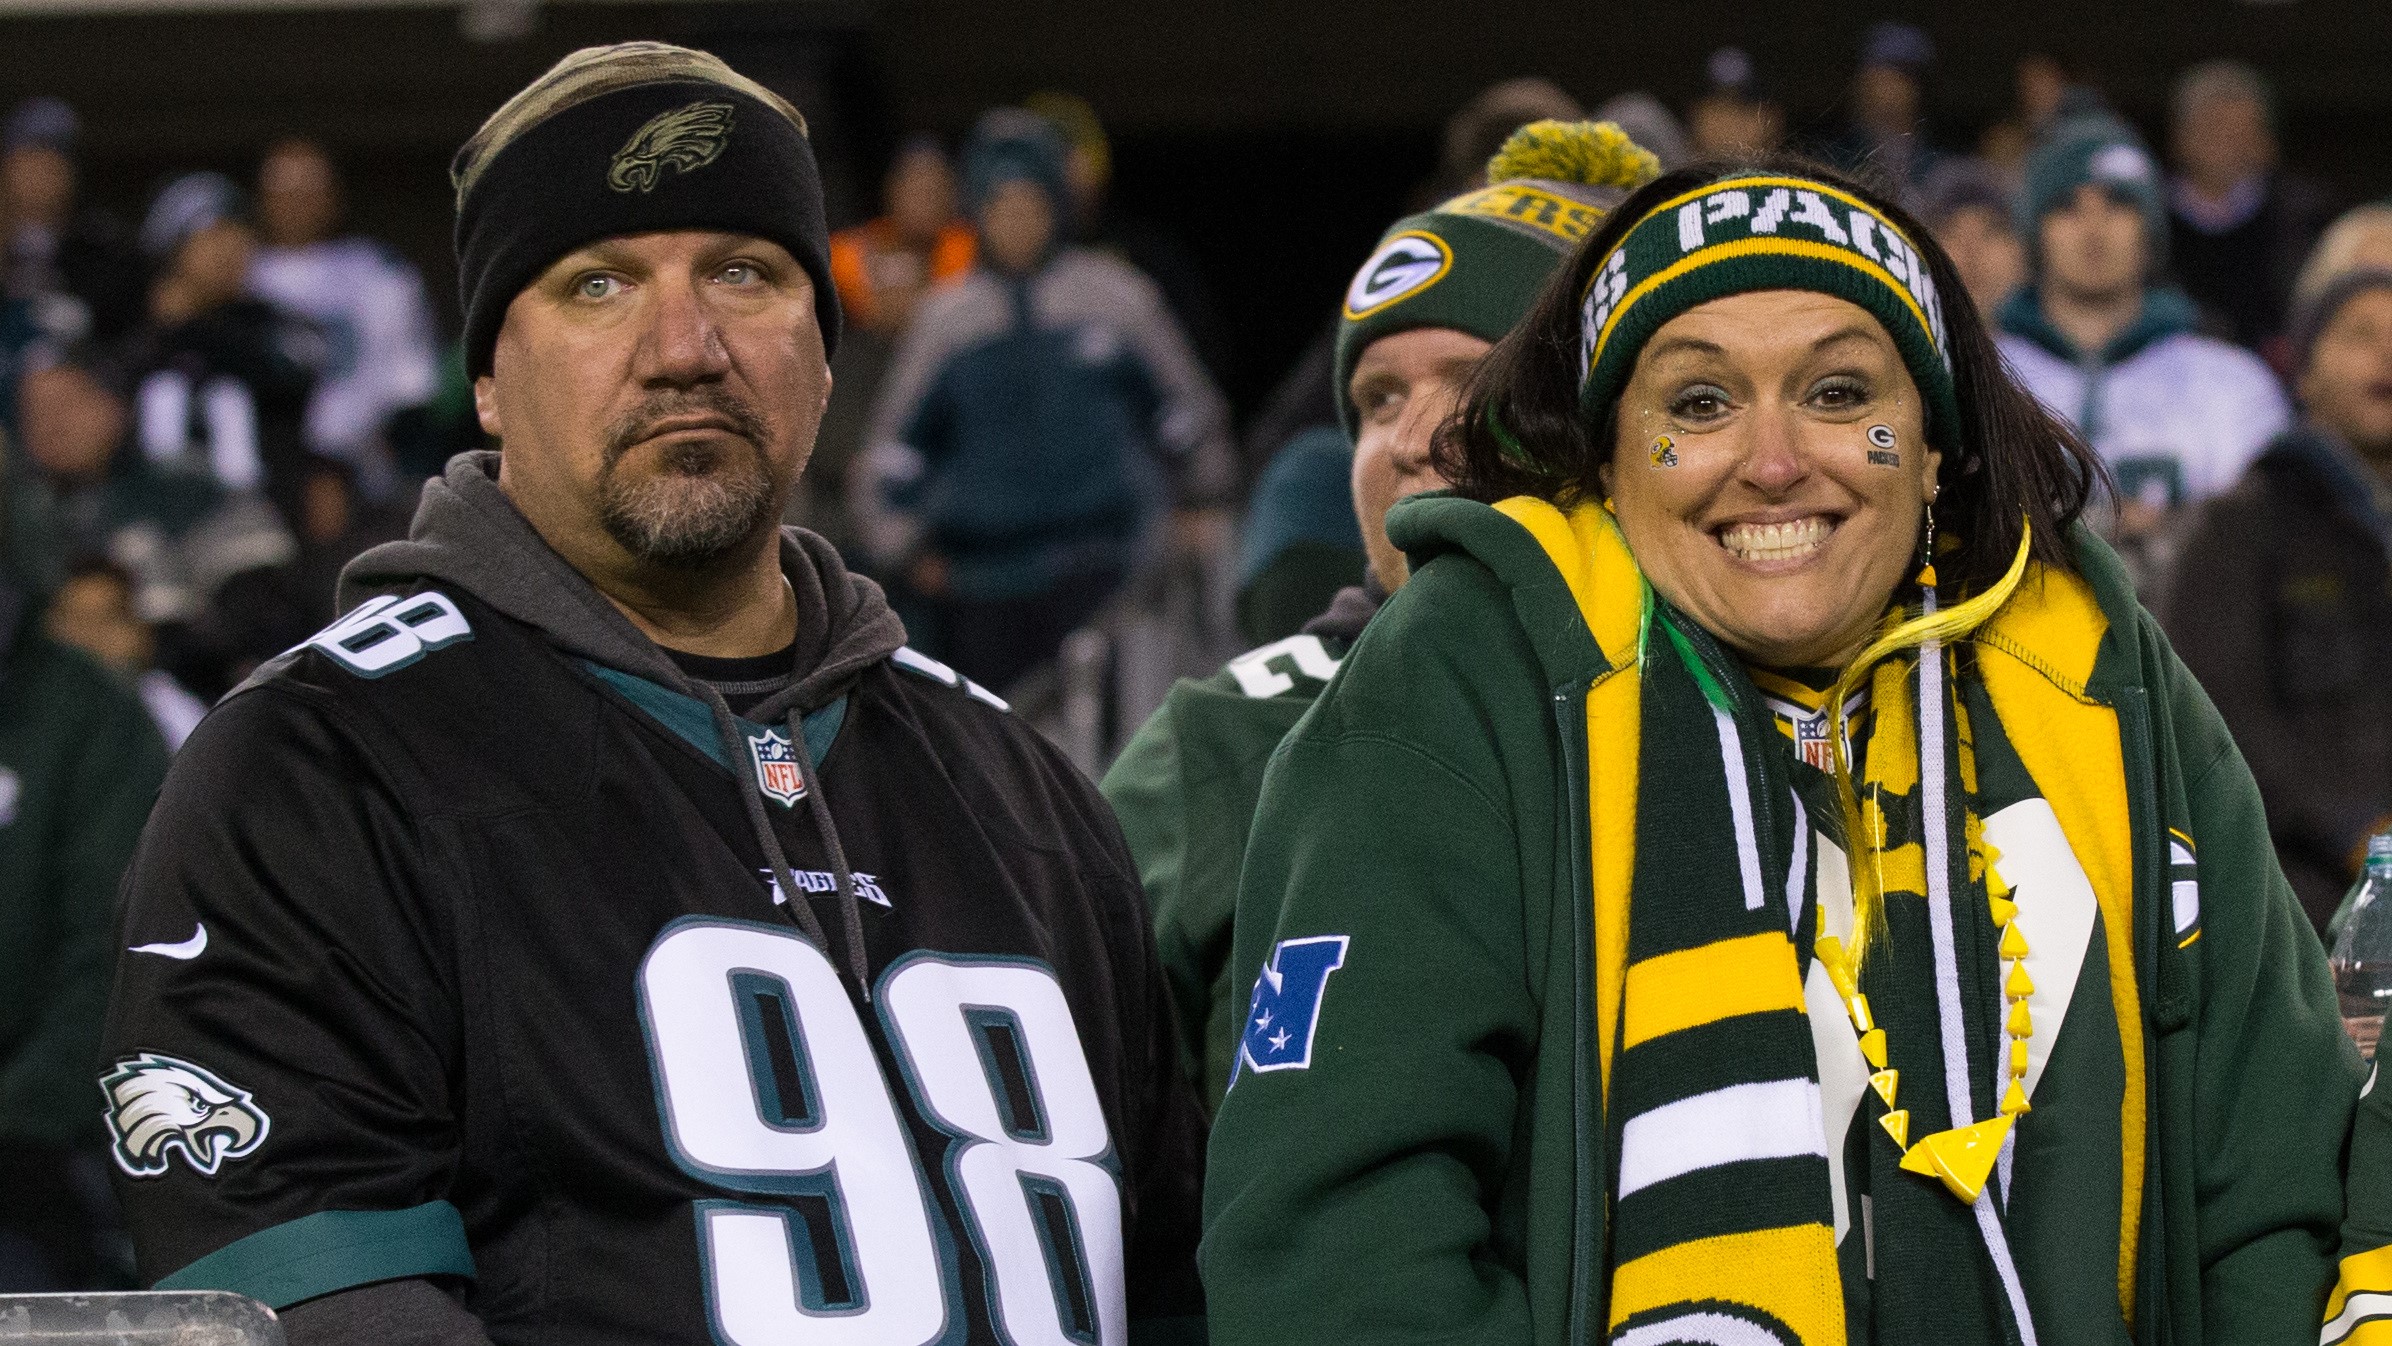 Packers-Eagles Tickets Are Third-Most Expensive of NFL Week 12